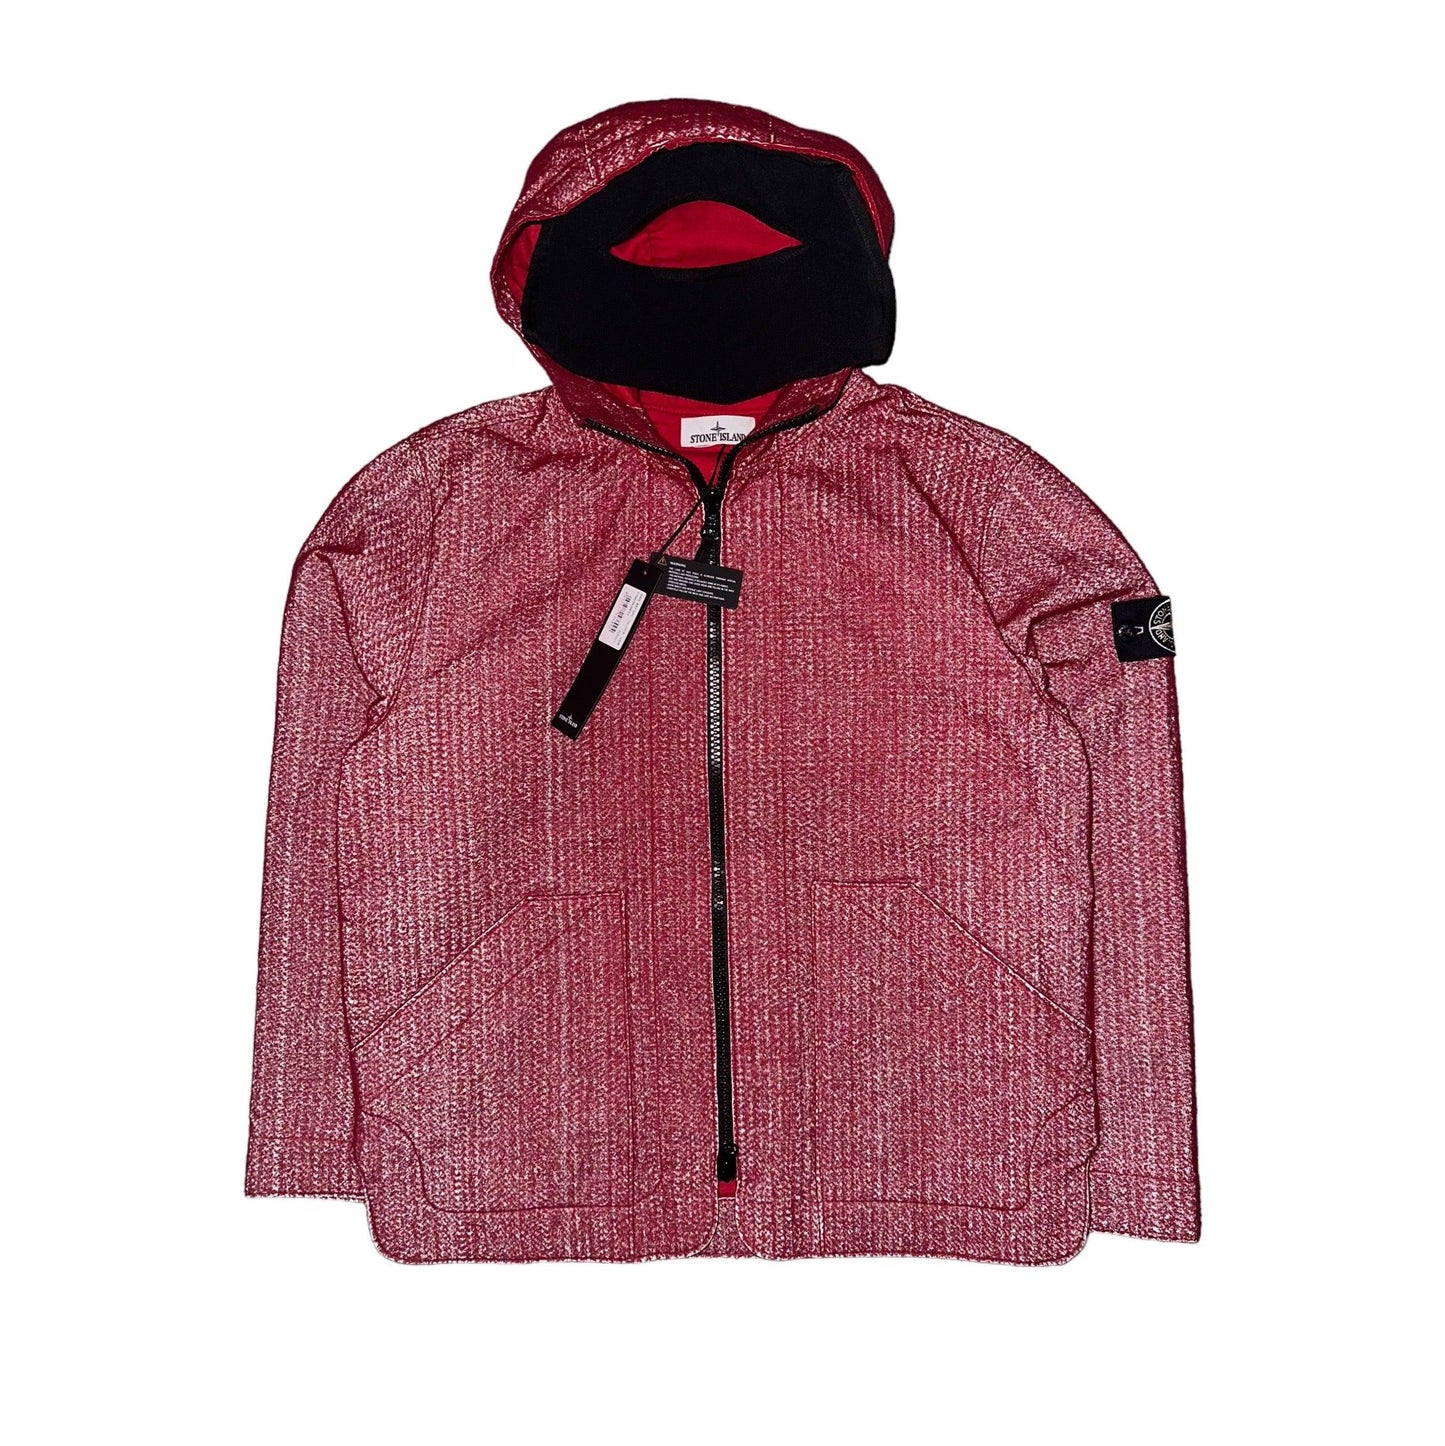 Stone Island Needle Punched Reflective Jacket with Special Process Badge - Known Source